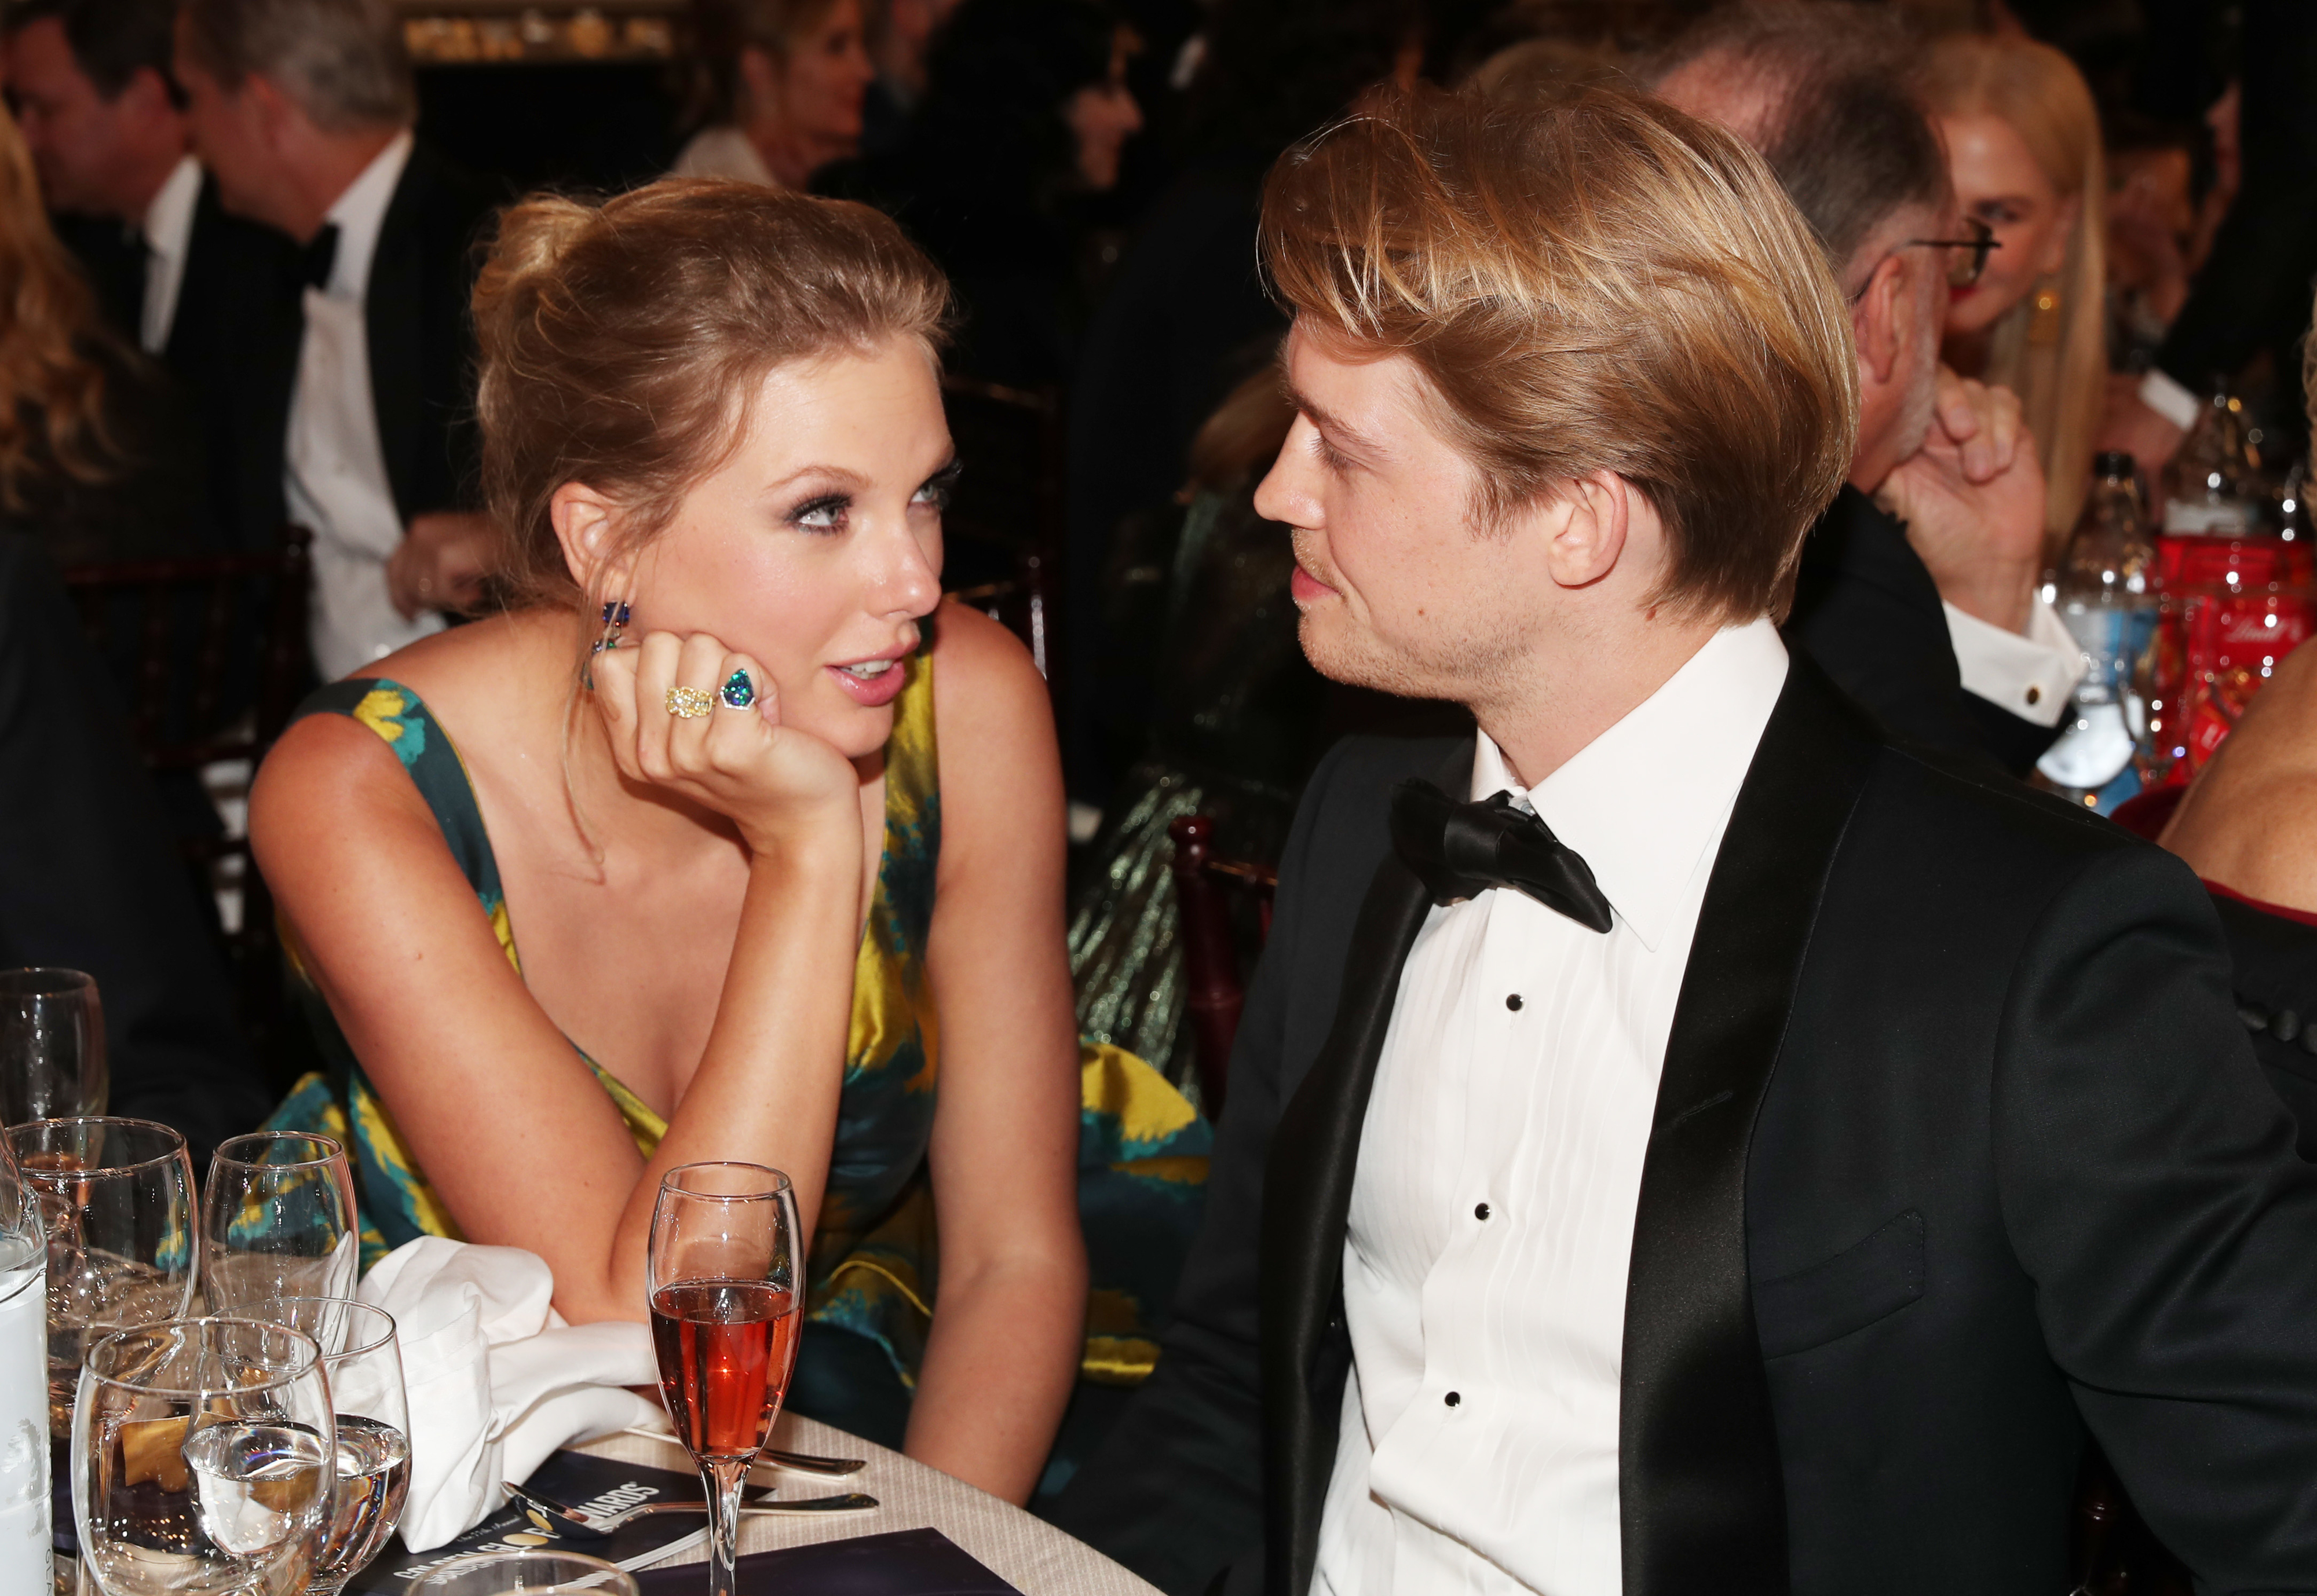 Taylor Swift conversing with Joe Alwyn as they sit at a table at a formal event